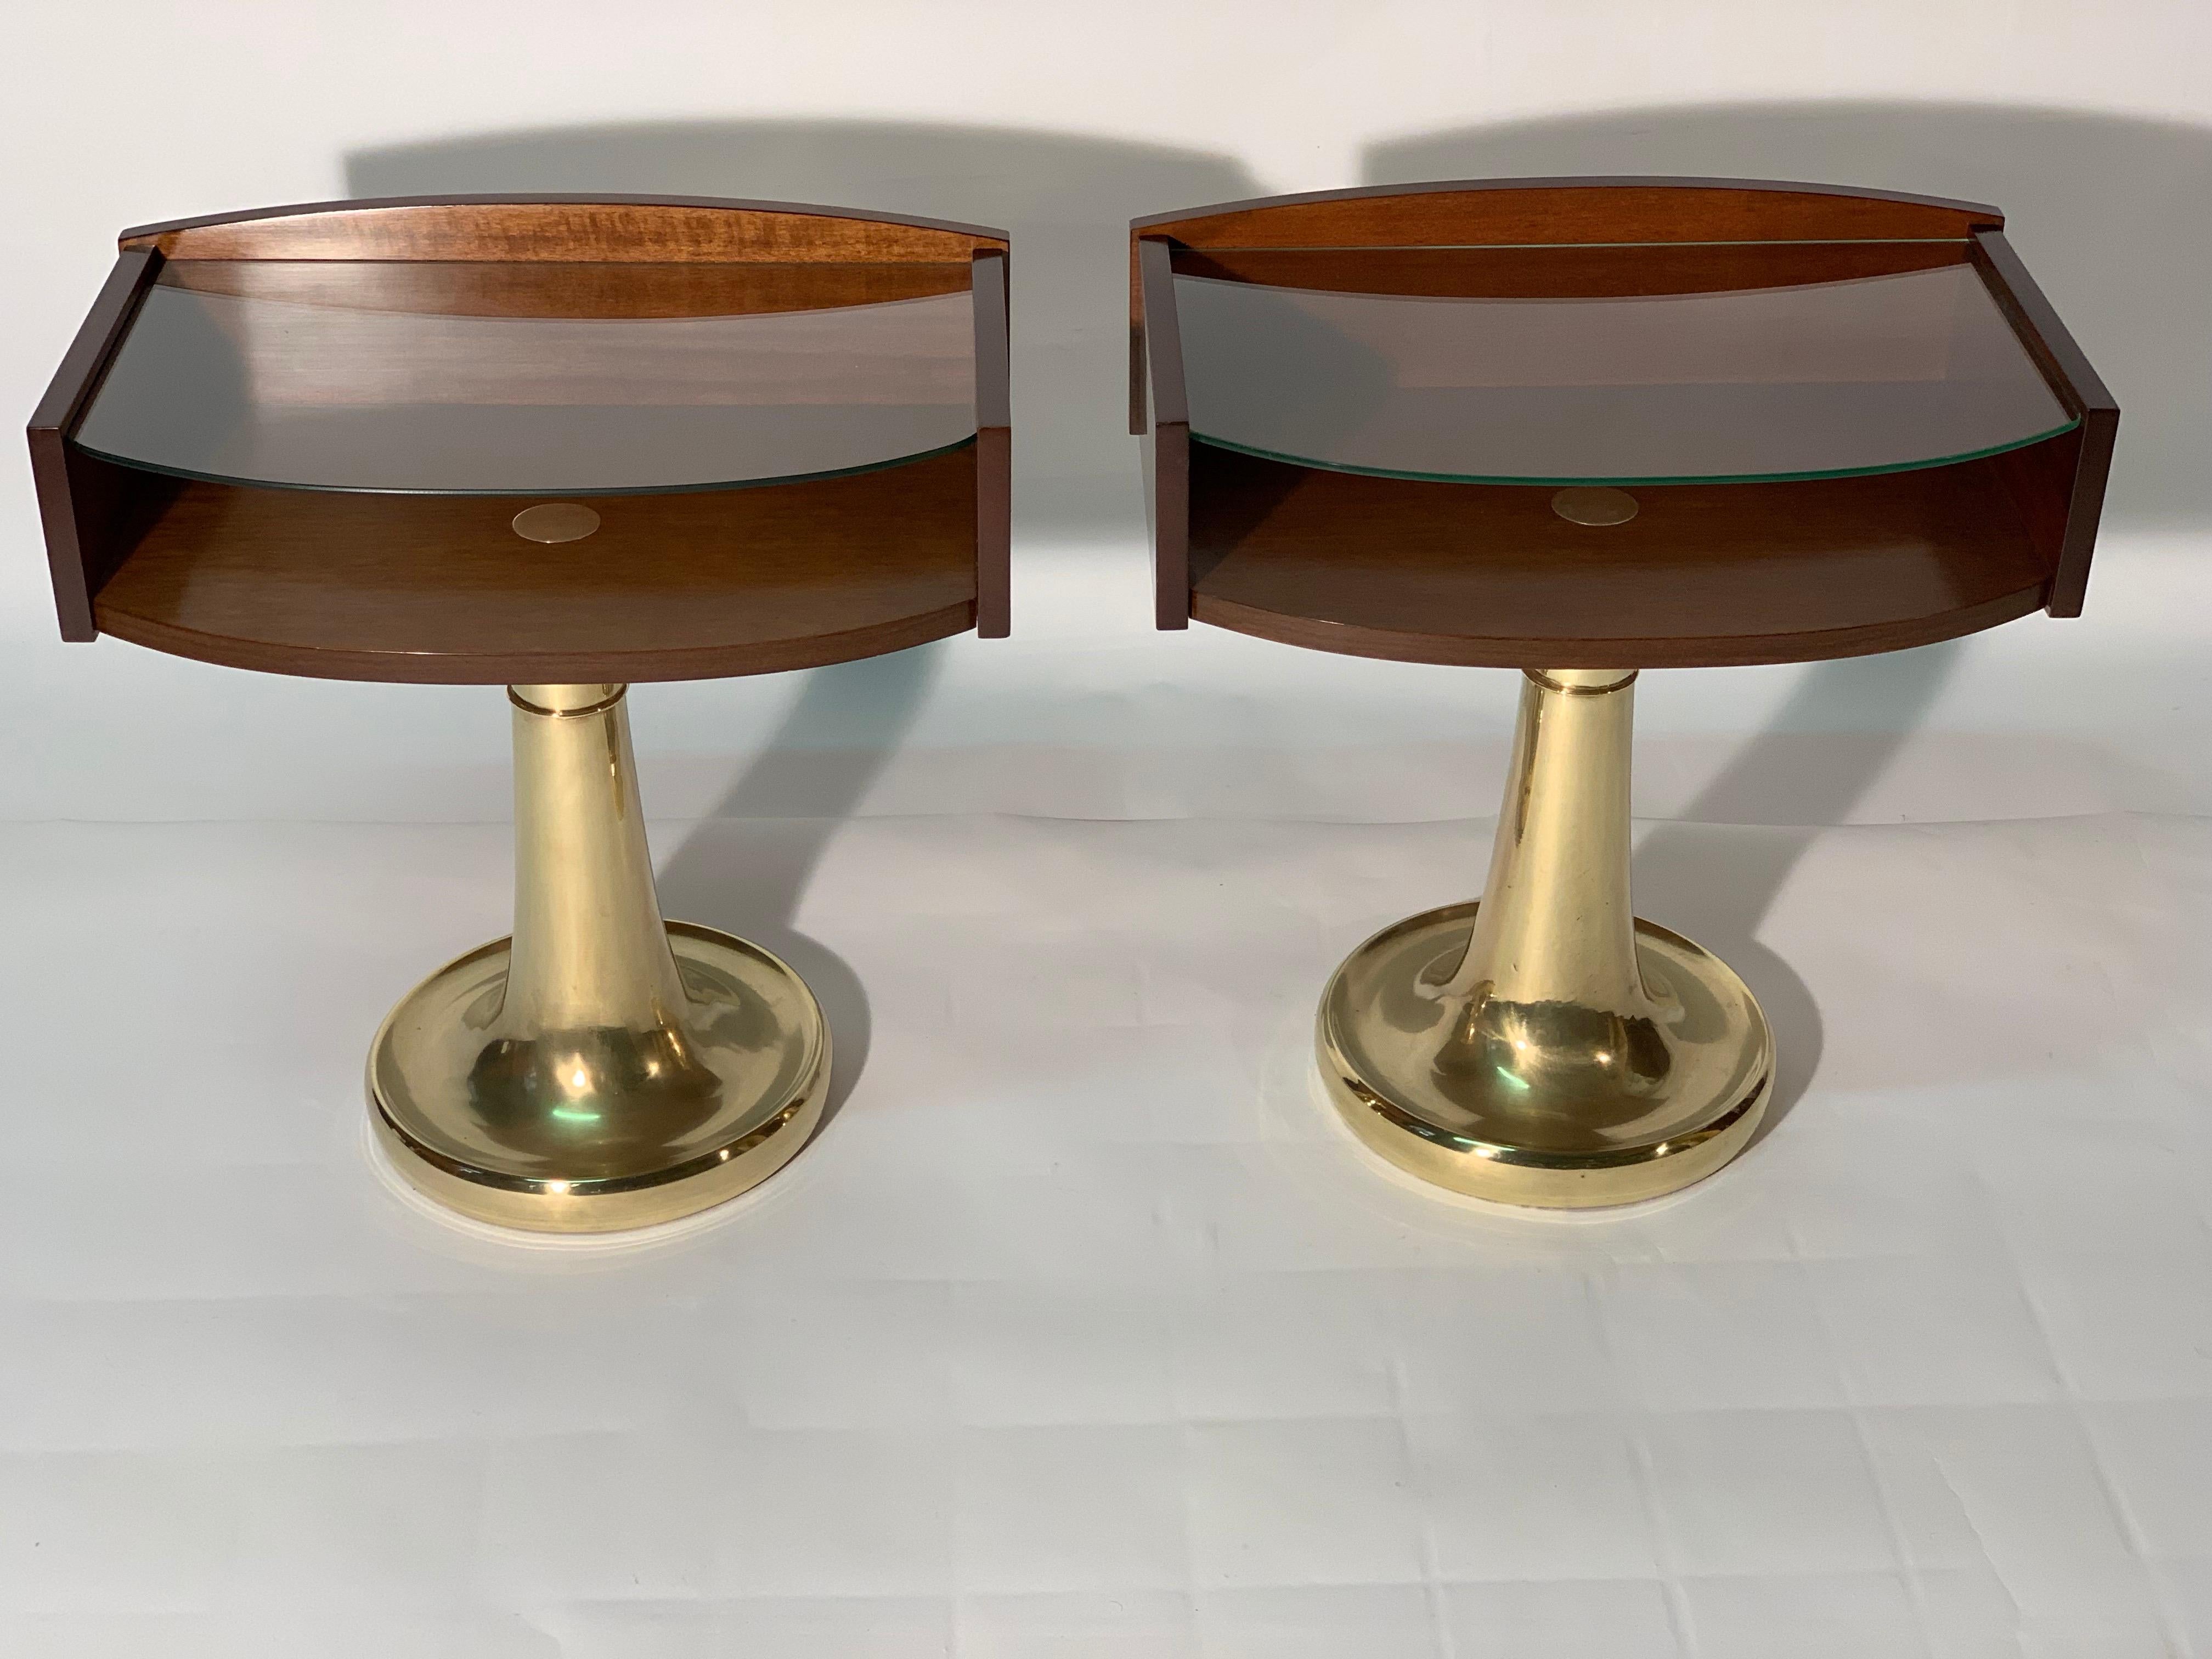 Pair of walnut curved front midcentury Italian 1960s nightstand or side table with encased glass top, additional walnut shelf below, cust brass round base.